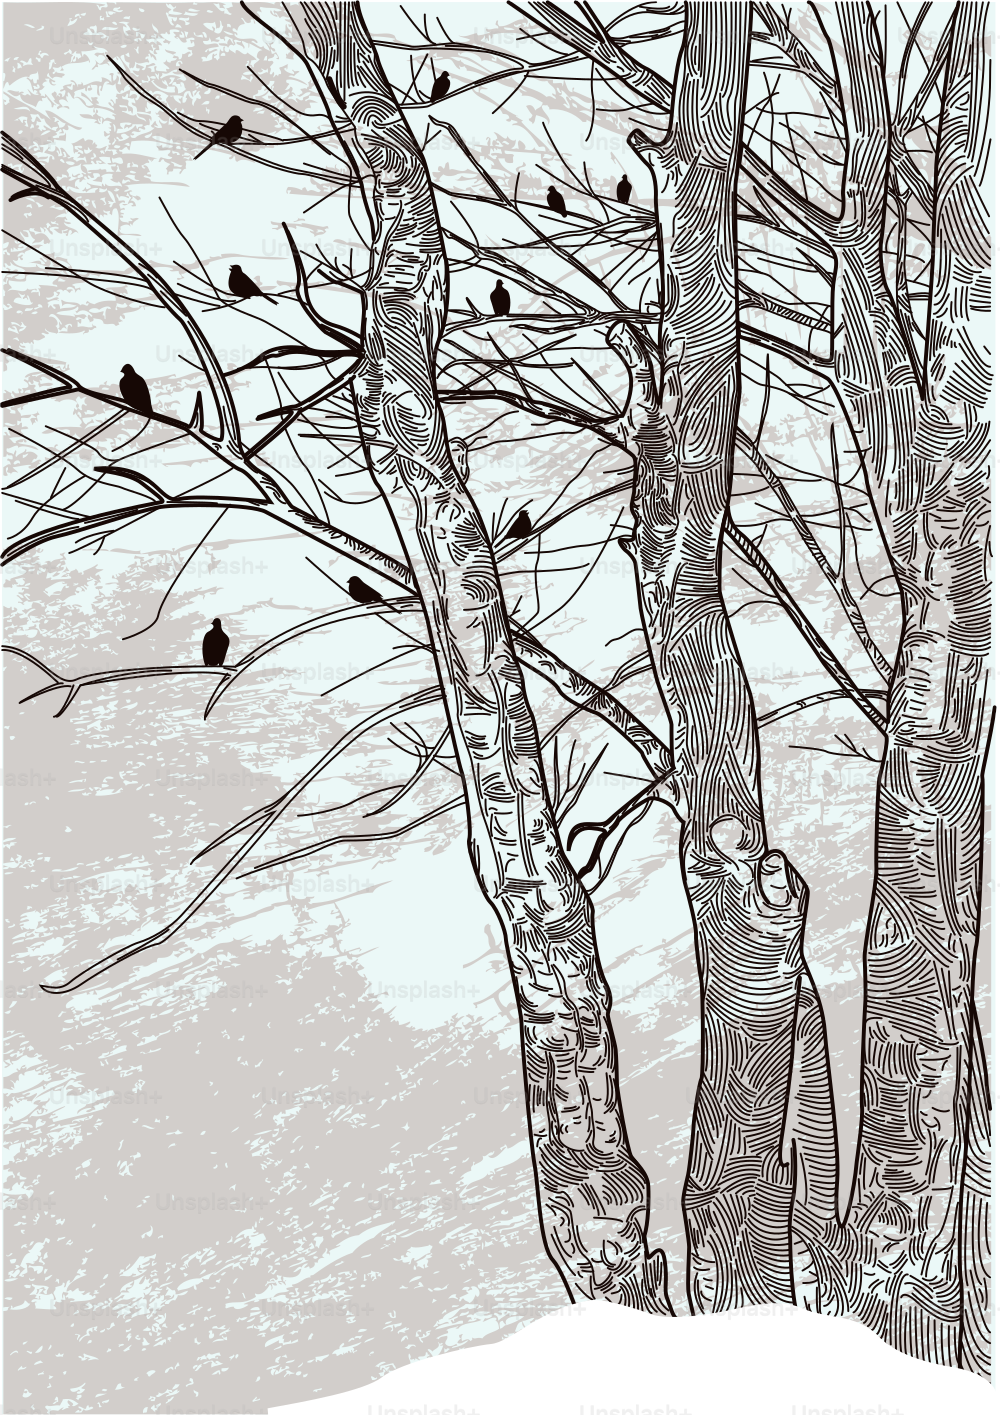 An updated illustration of some barren winter trees.